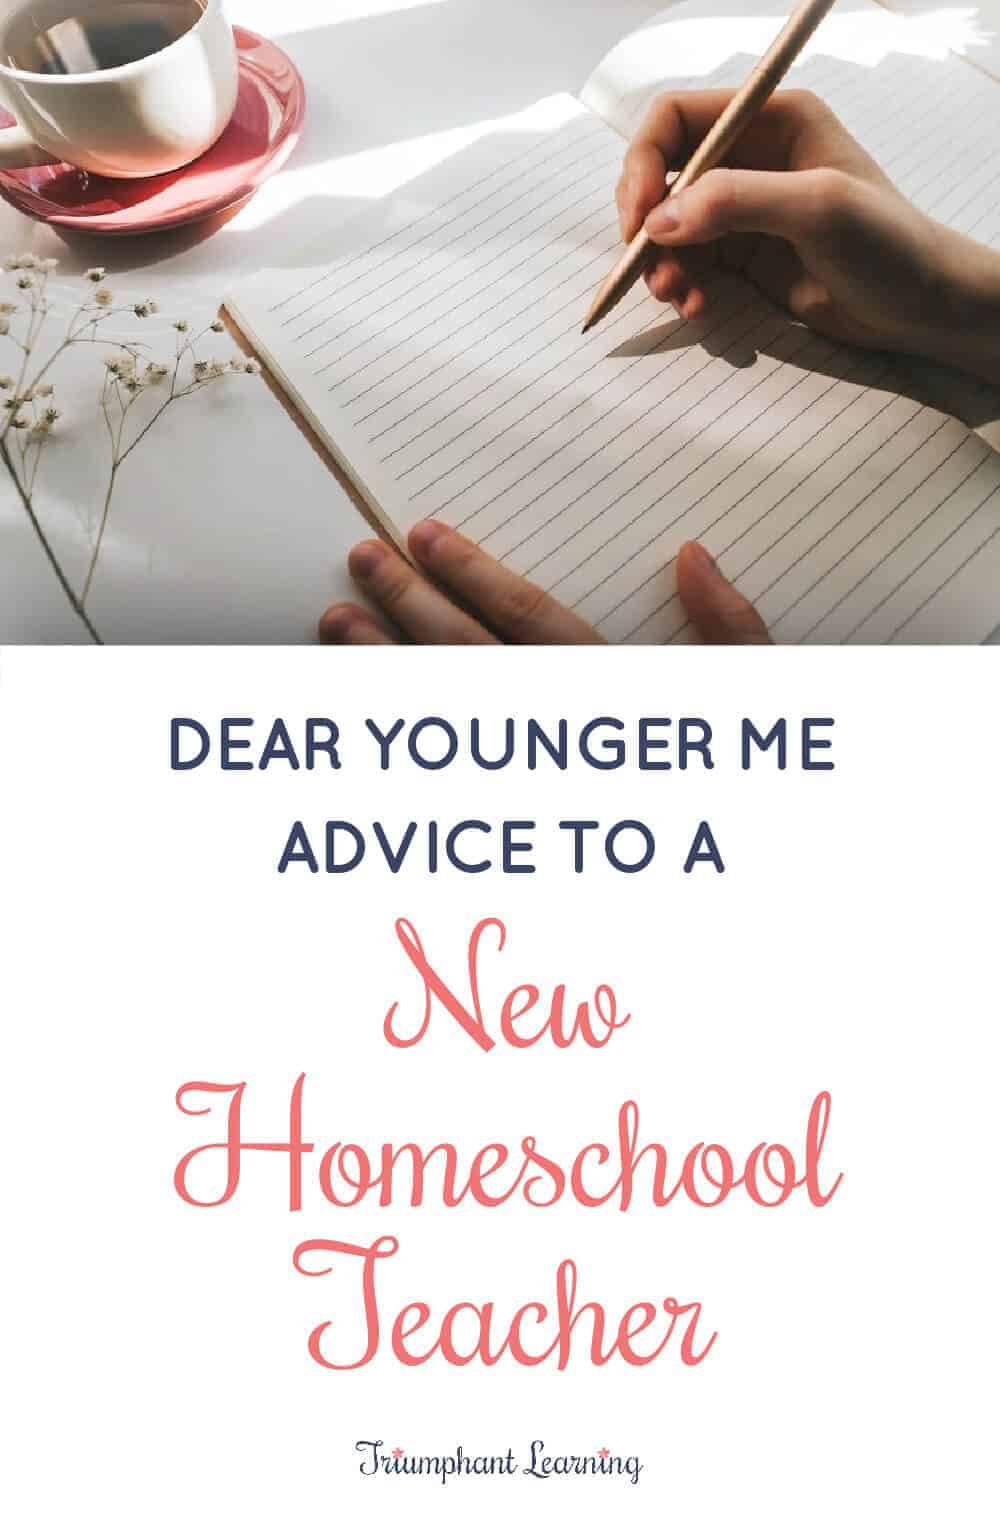 As a new homeschool parent, you have lots of questions. This is the homeschool advice I wish I had received when we started our journey. via @TriLearning